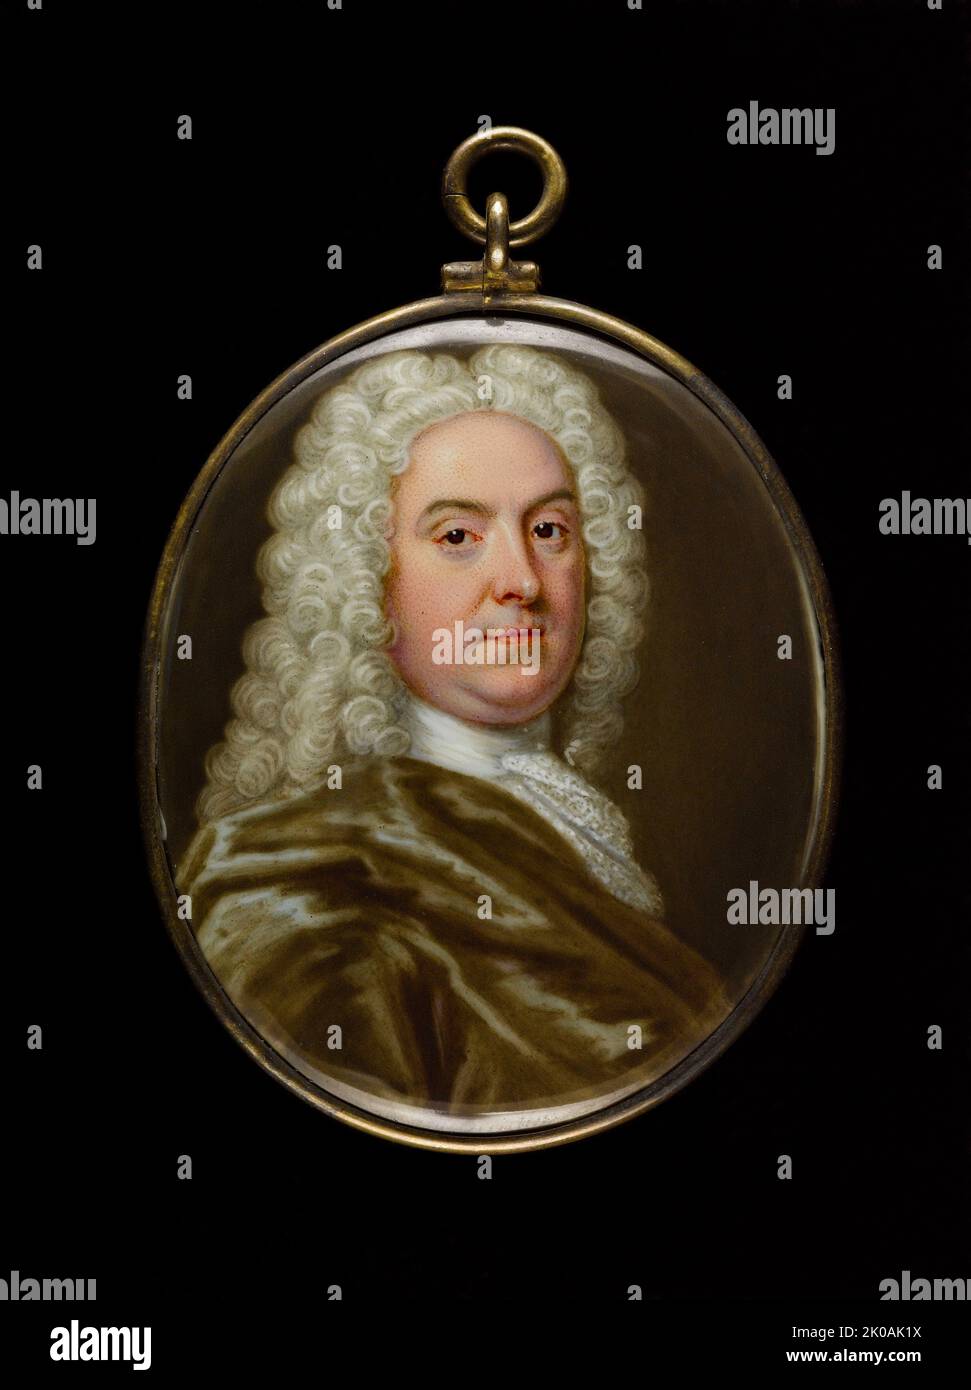 Portrait of a man, between 1725 and 1750. Stock Photo